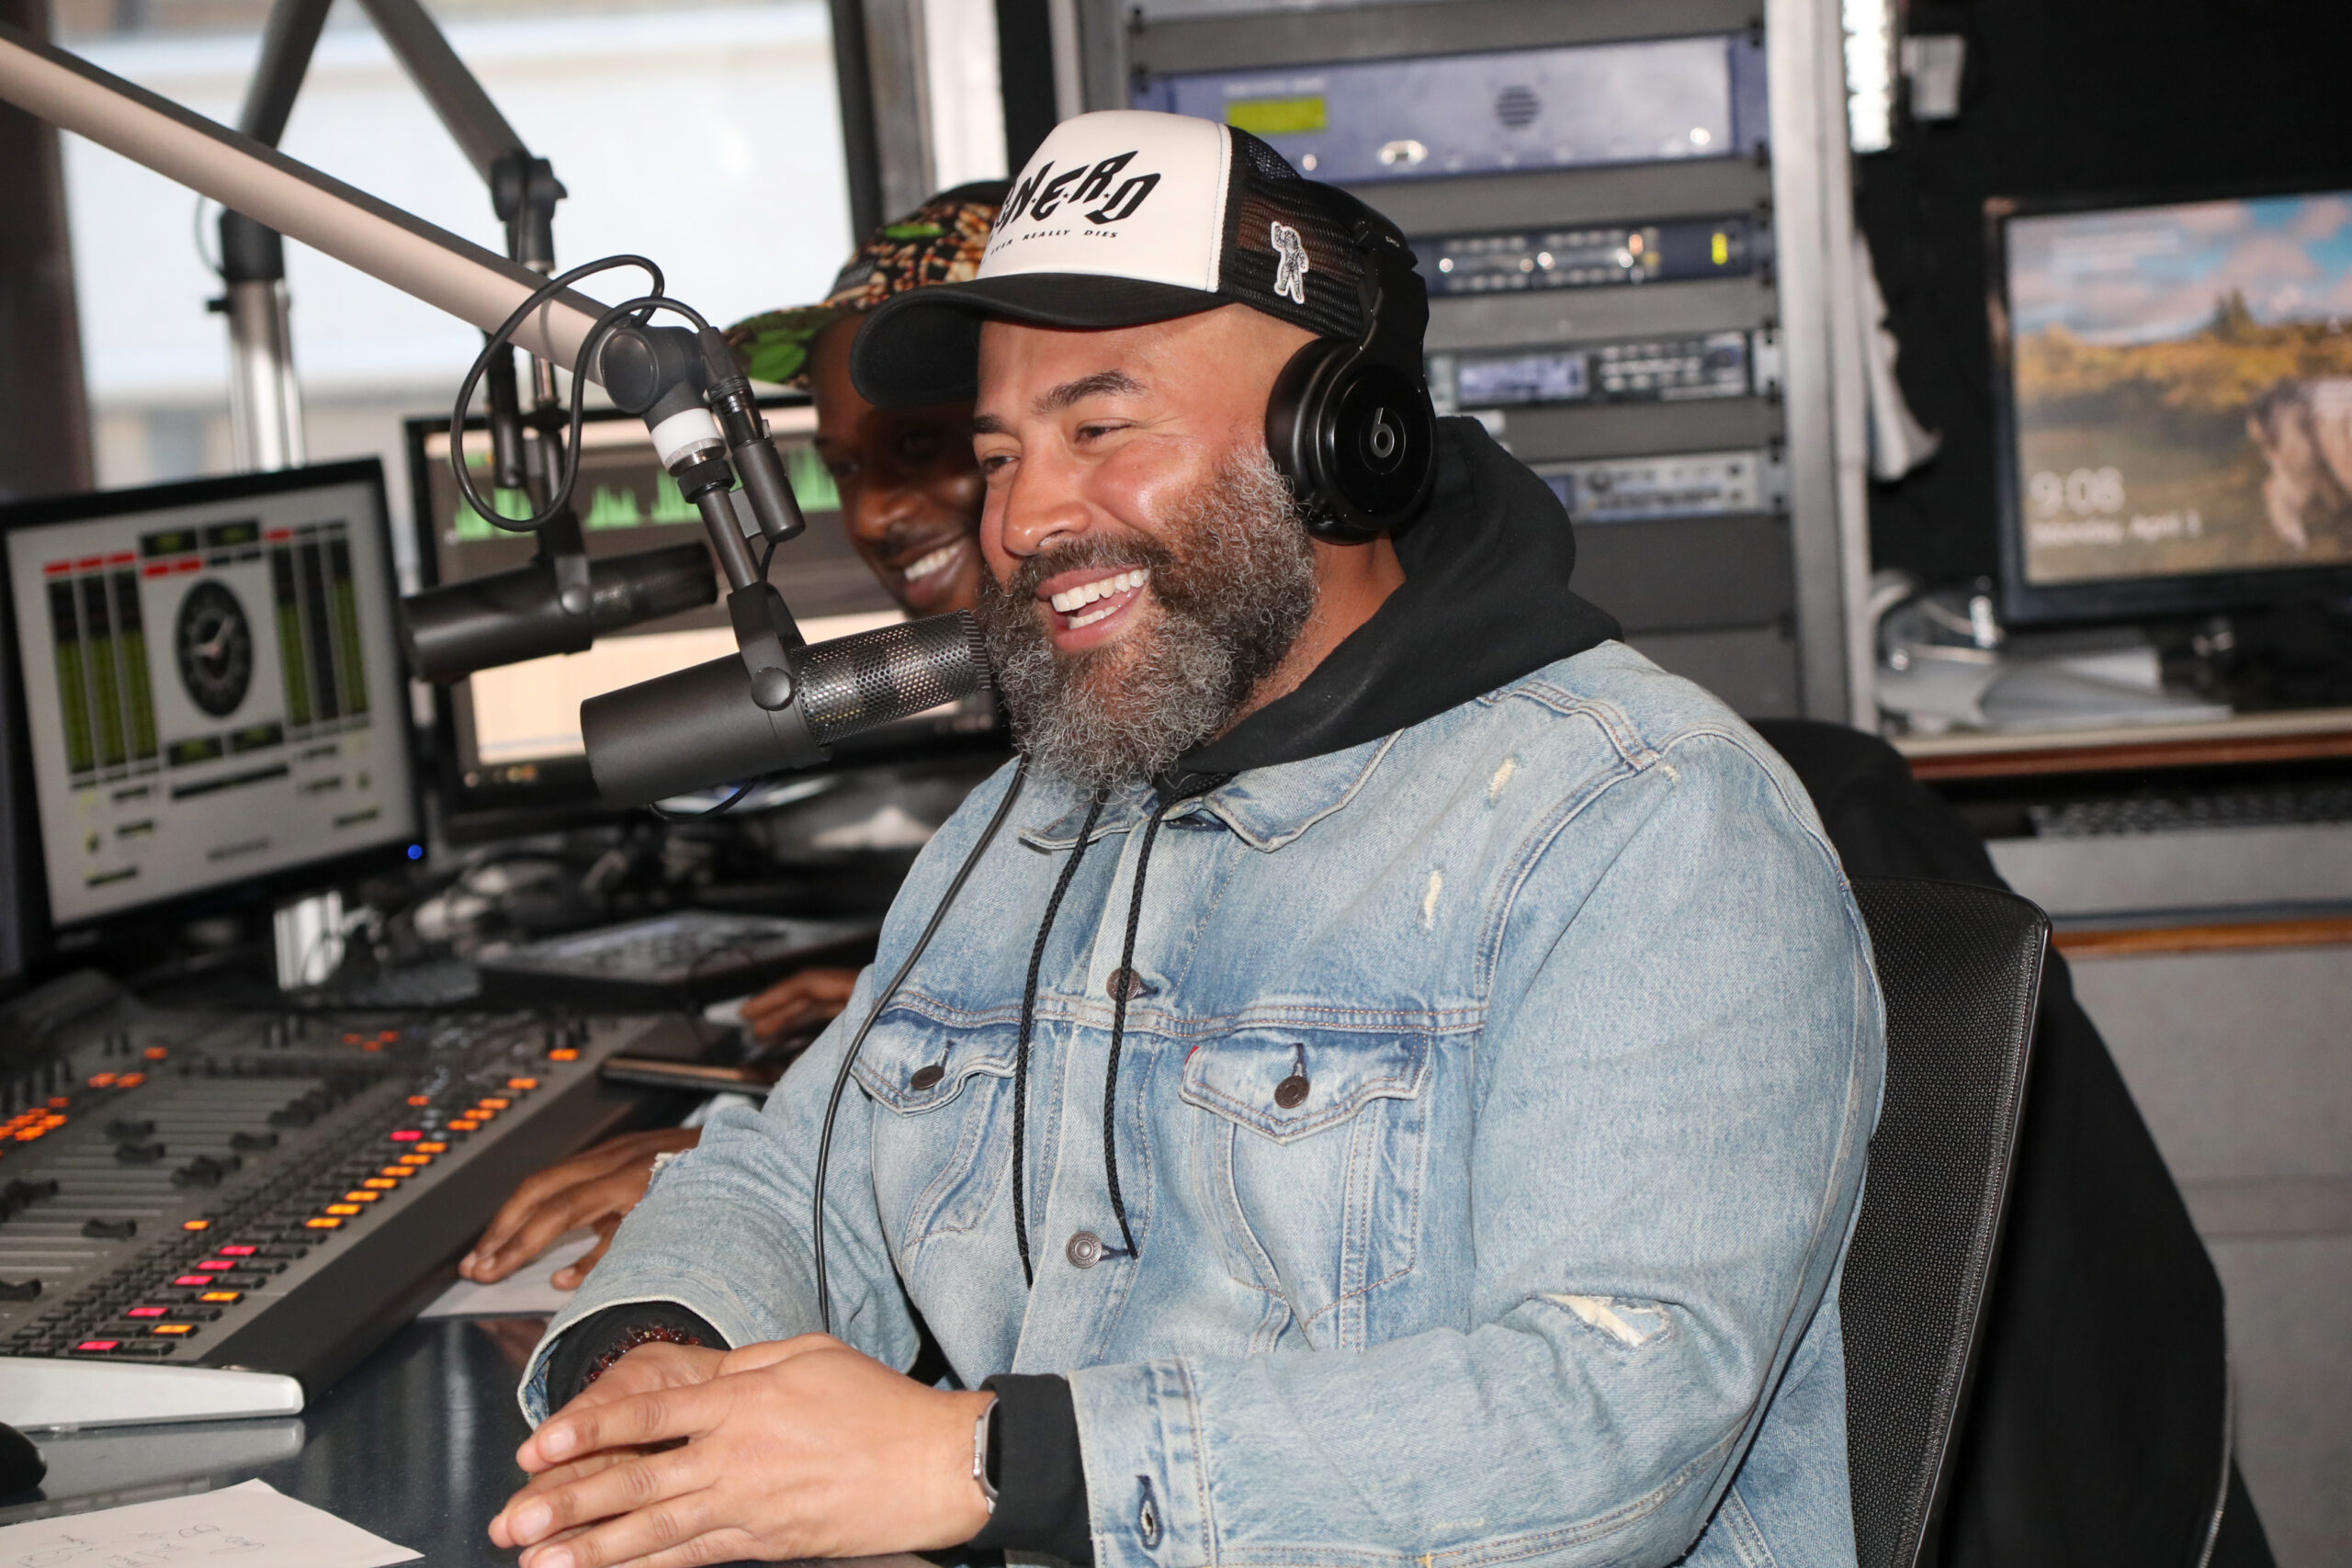 Ebro Darden Clarifies Viral Drake Comments: “We Don’t Need Him To Be Some Social Activist”